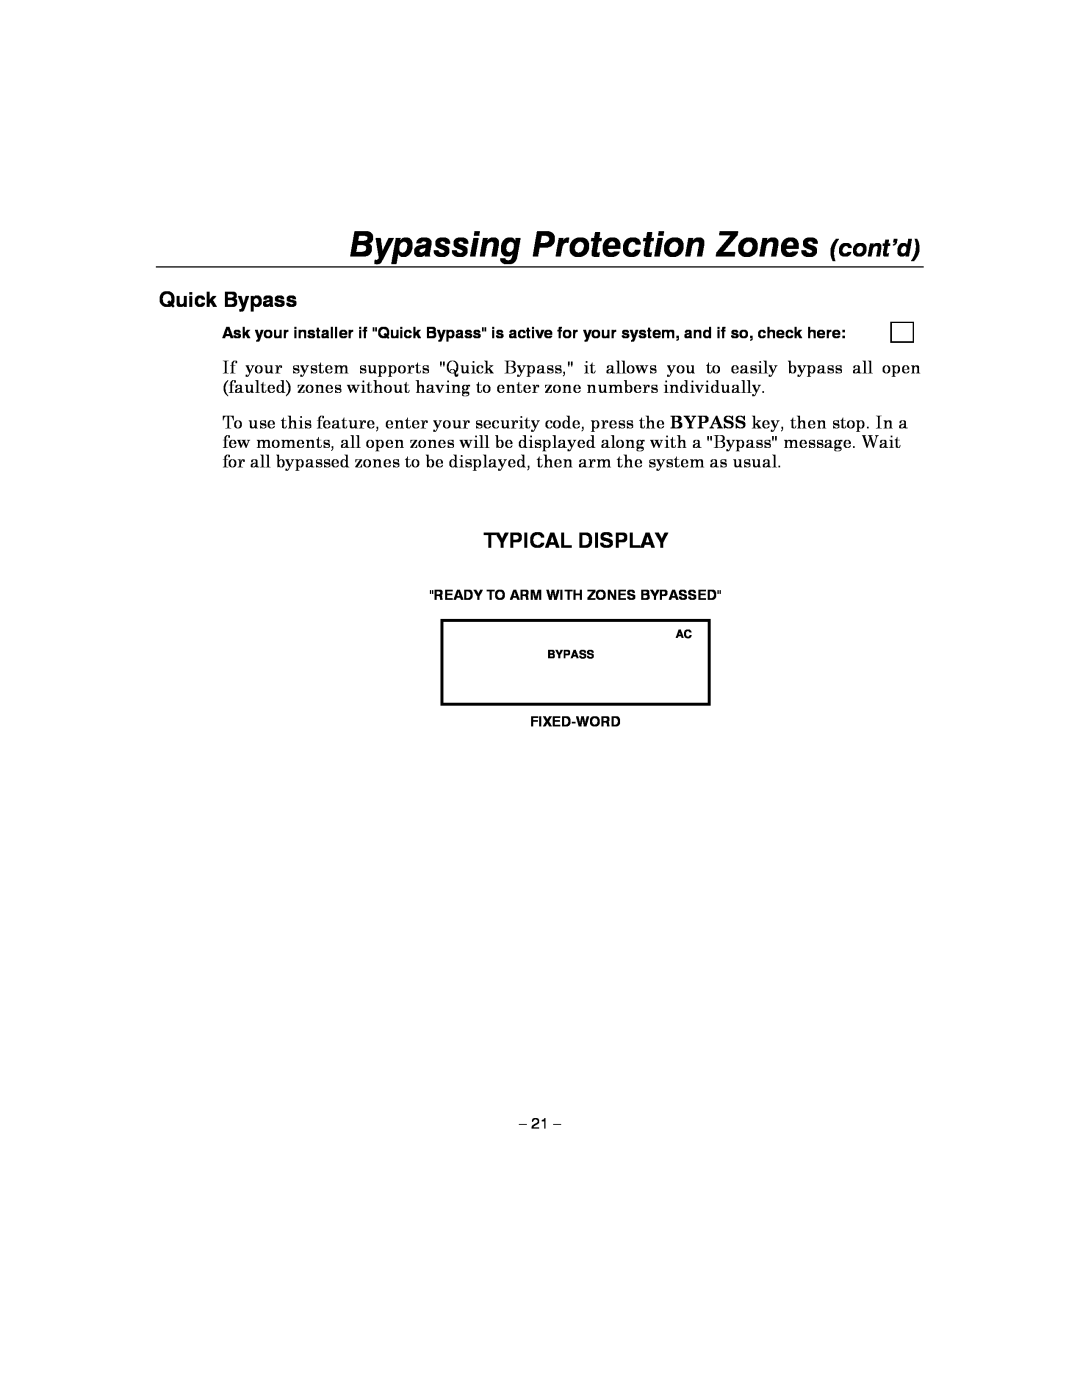 Honeywell 4110XM manual Bypassing Protection Zones cont’d, Quick Bypass, Typical Display 